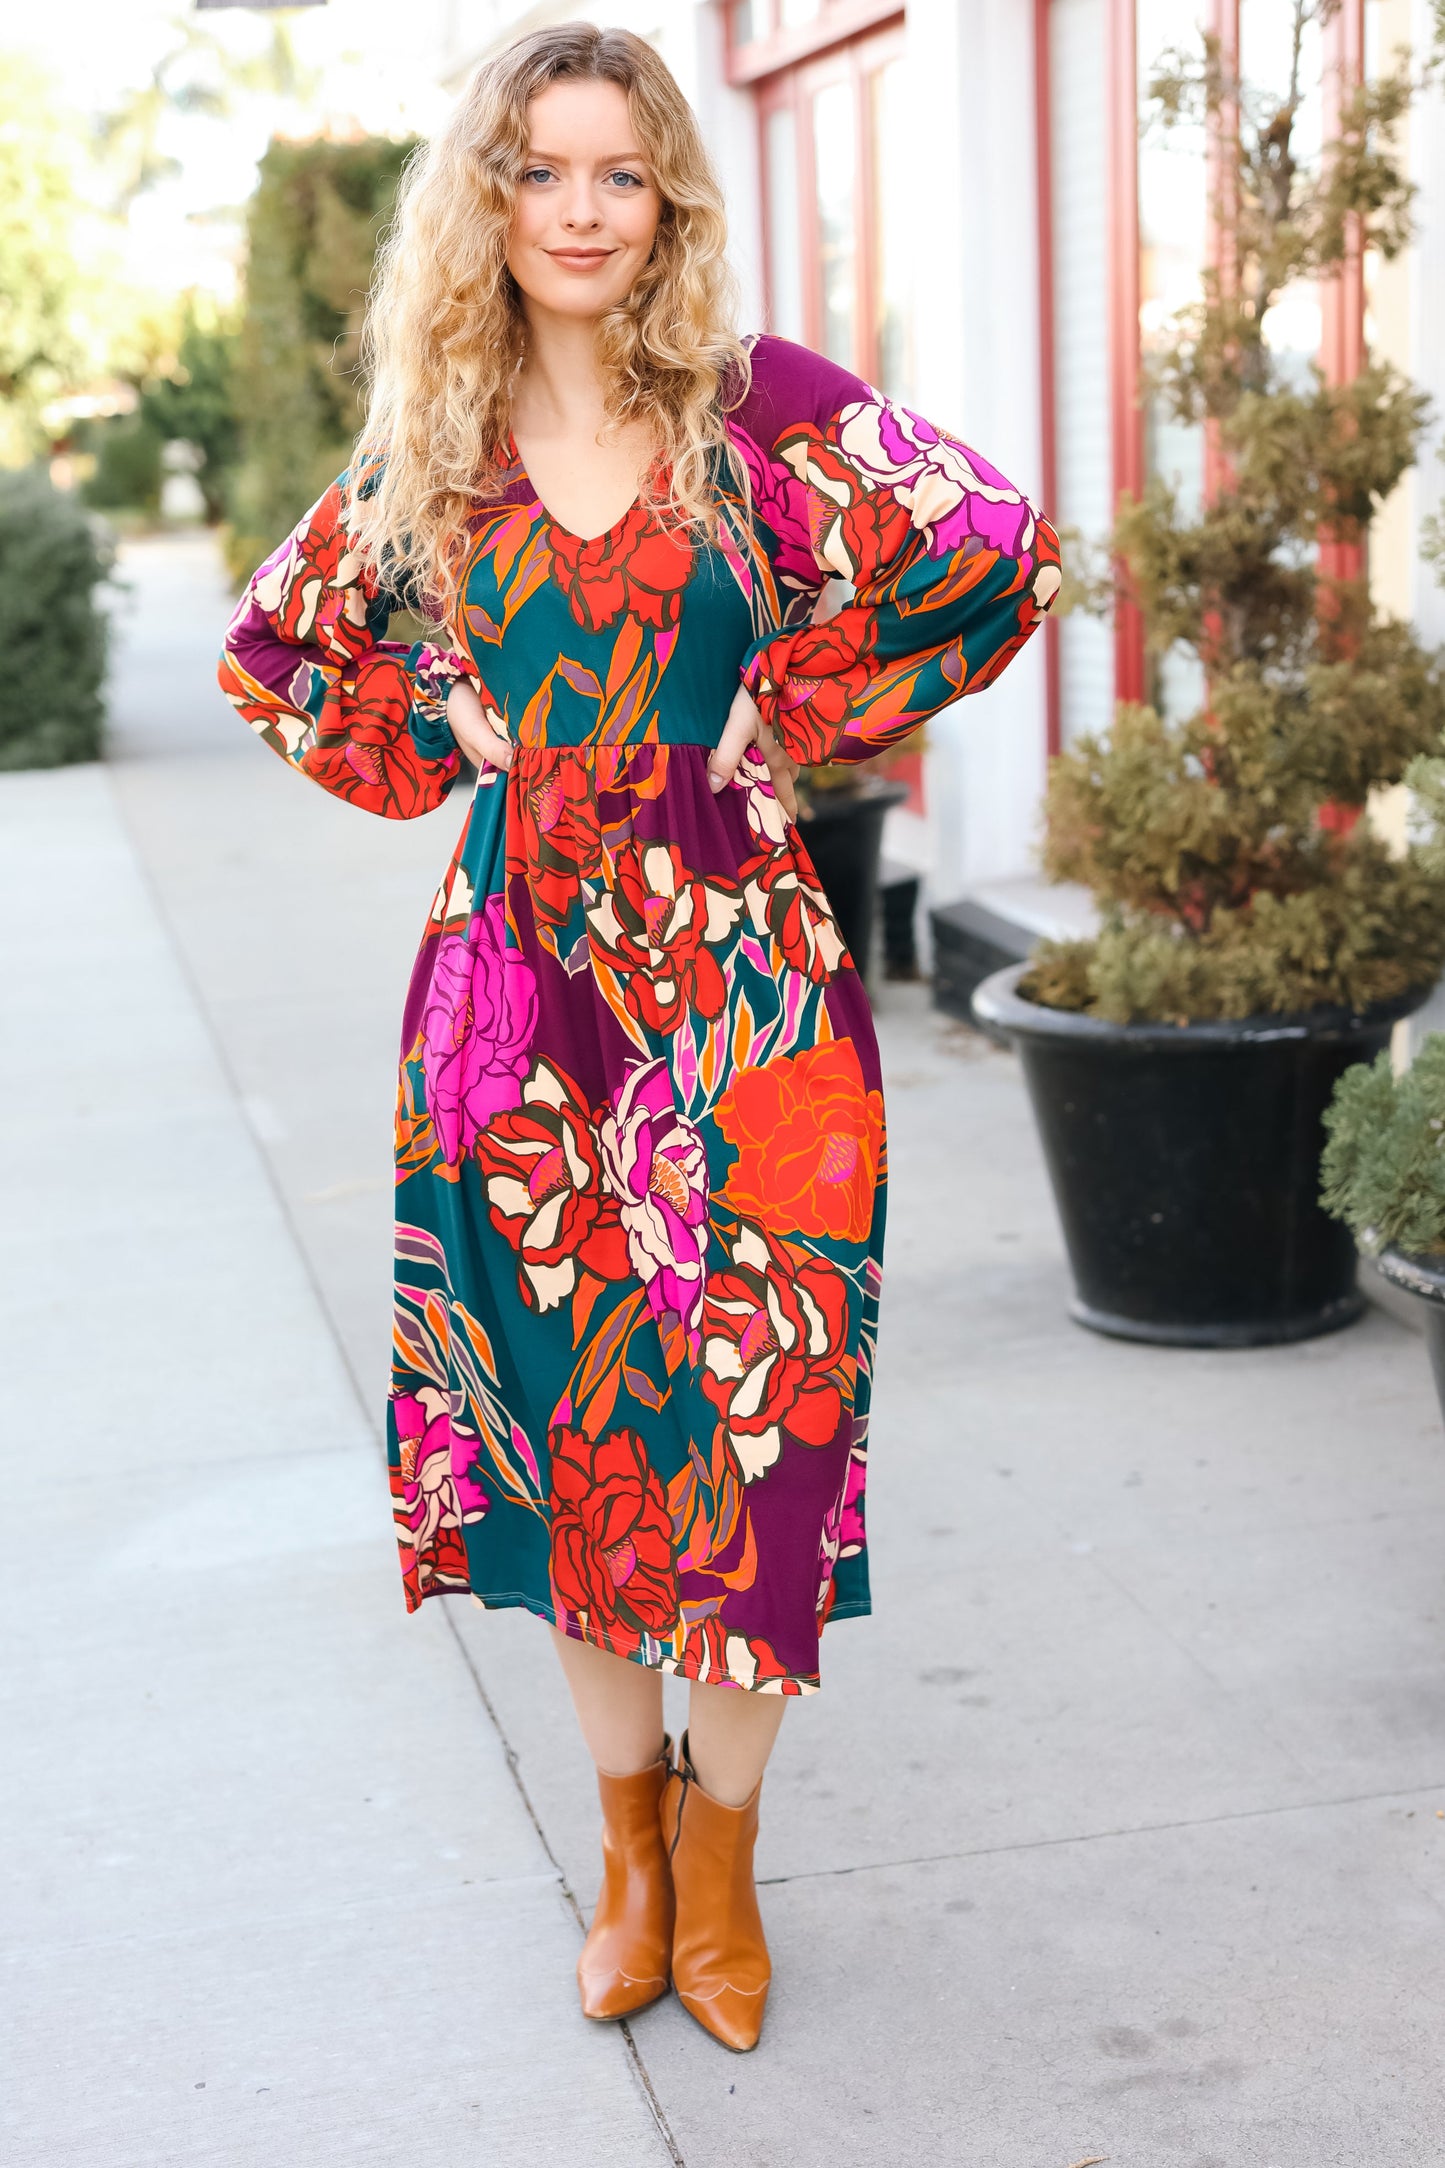 Stand For Love Fuchsia Floral Print Fit and Flare Dress